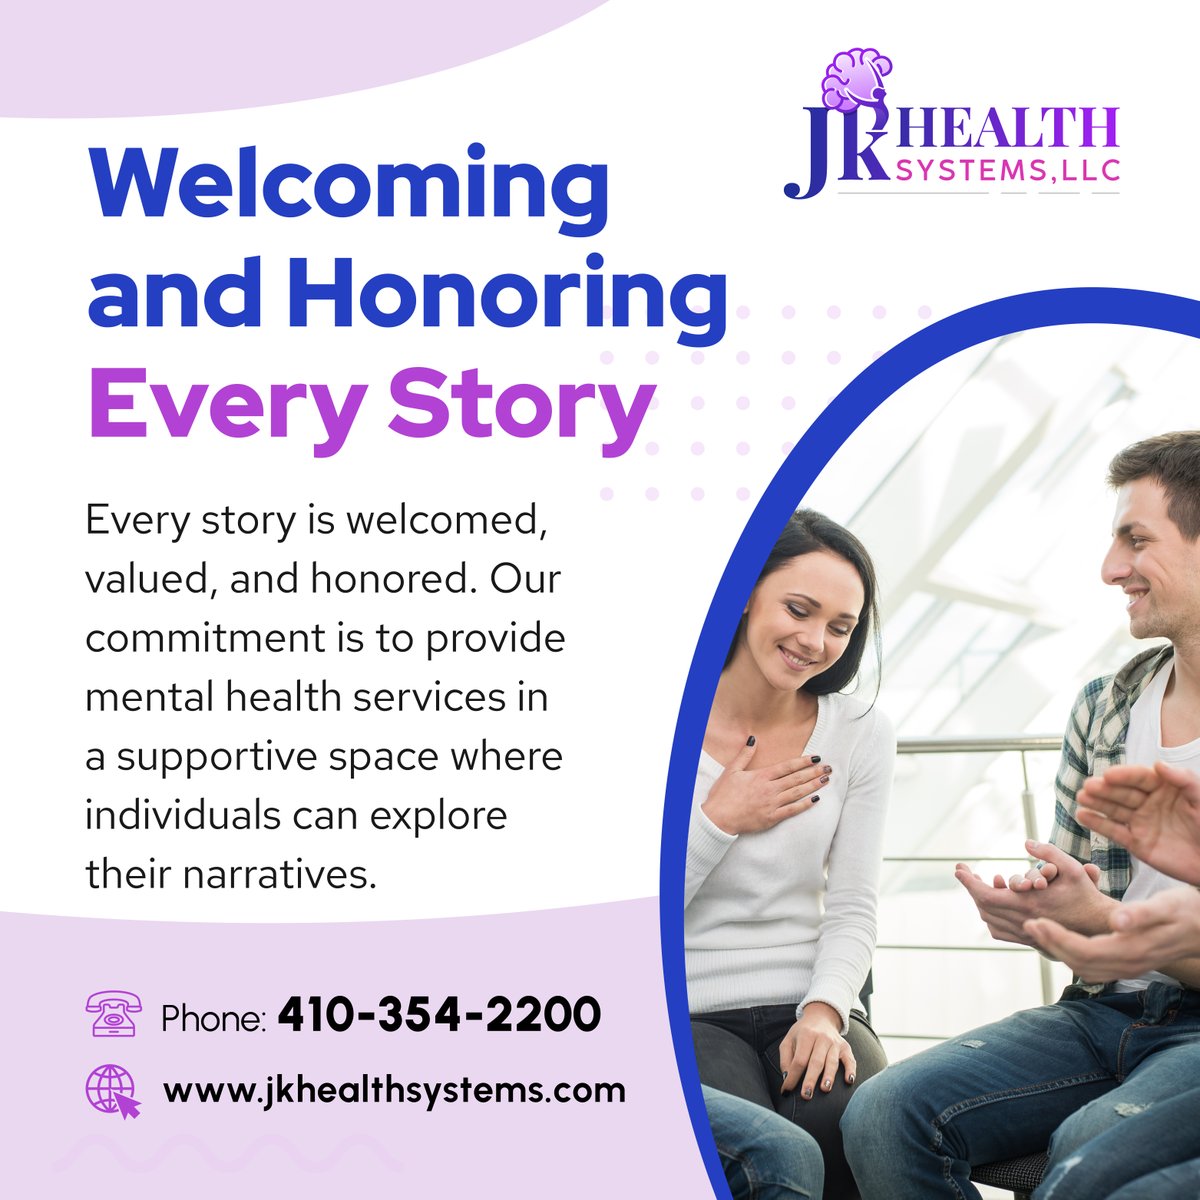 Take the first step towards a healthier, happier you. Jk Health Systems,LLC honors your individuality by tailoring our services to meet your unique needs. 

#PersonalizedSupport #WellbeingJourney #MentalHealthCare #BaltimoreMD